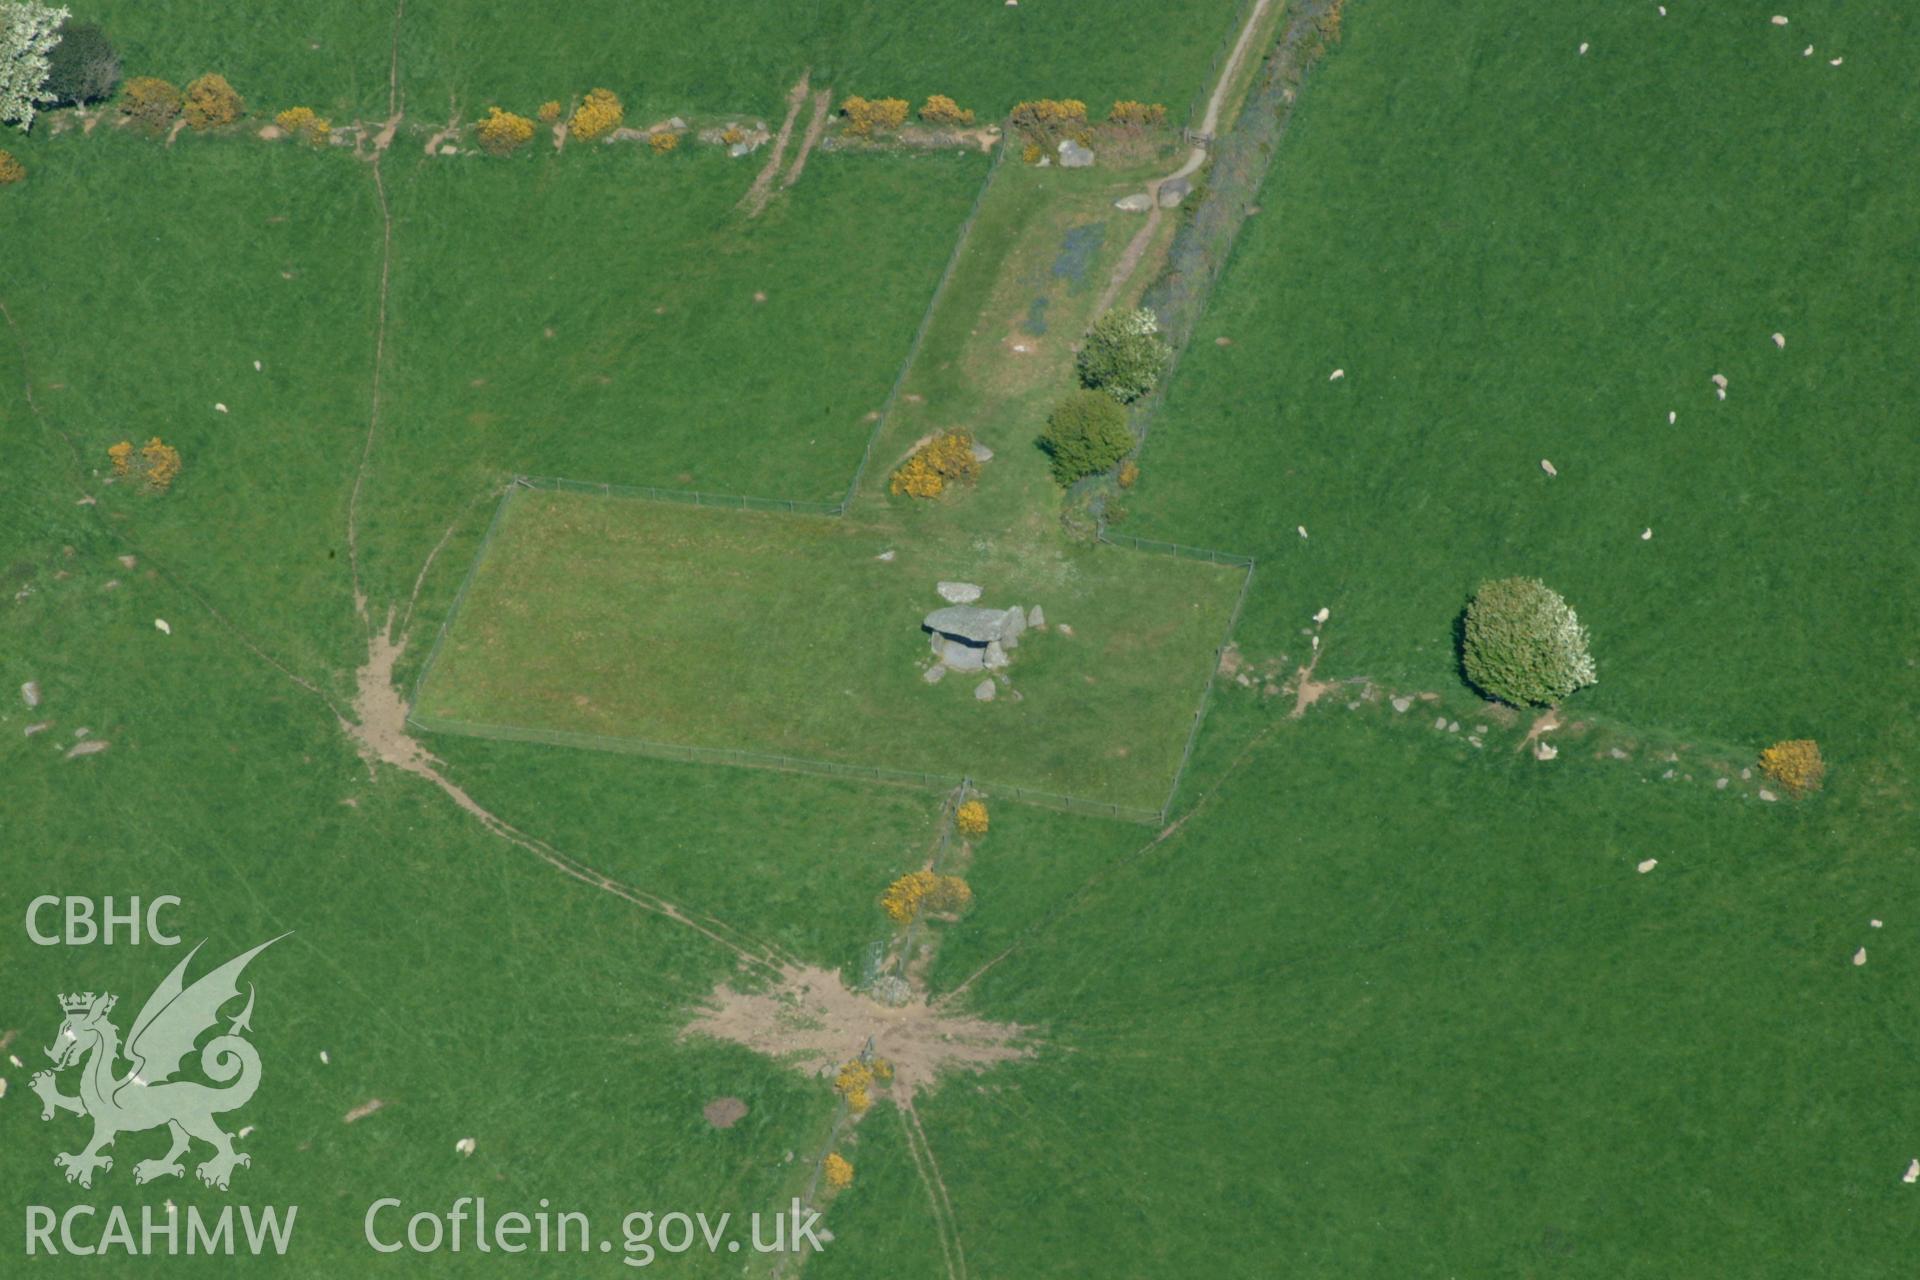 RCAHMW colour oblique aerial photograph of Pentre Ifan Chambered Tomb, near Nevern taken on 24/05/2004 by Toby Driver